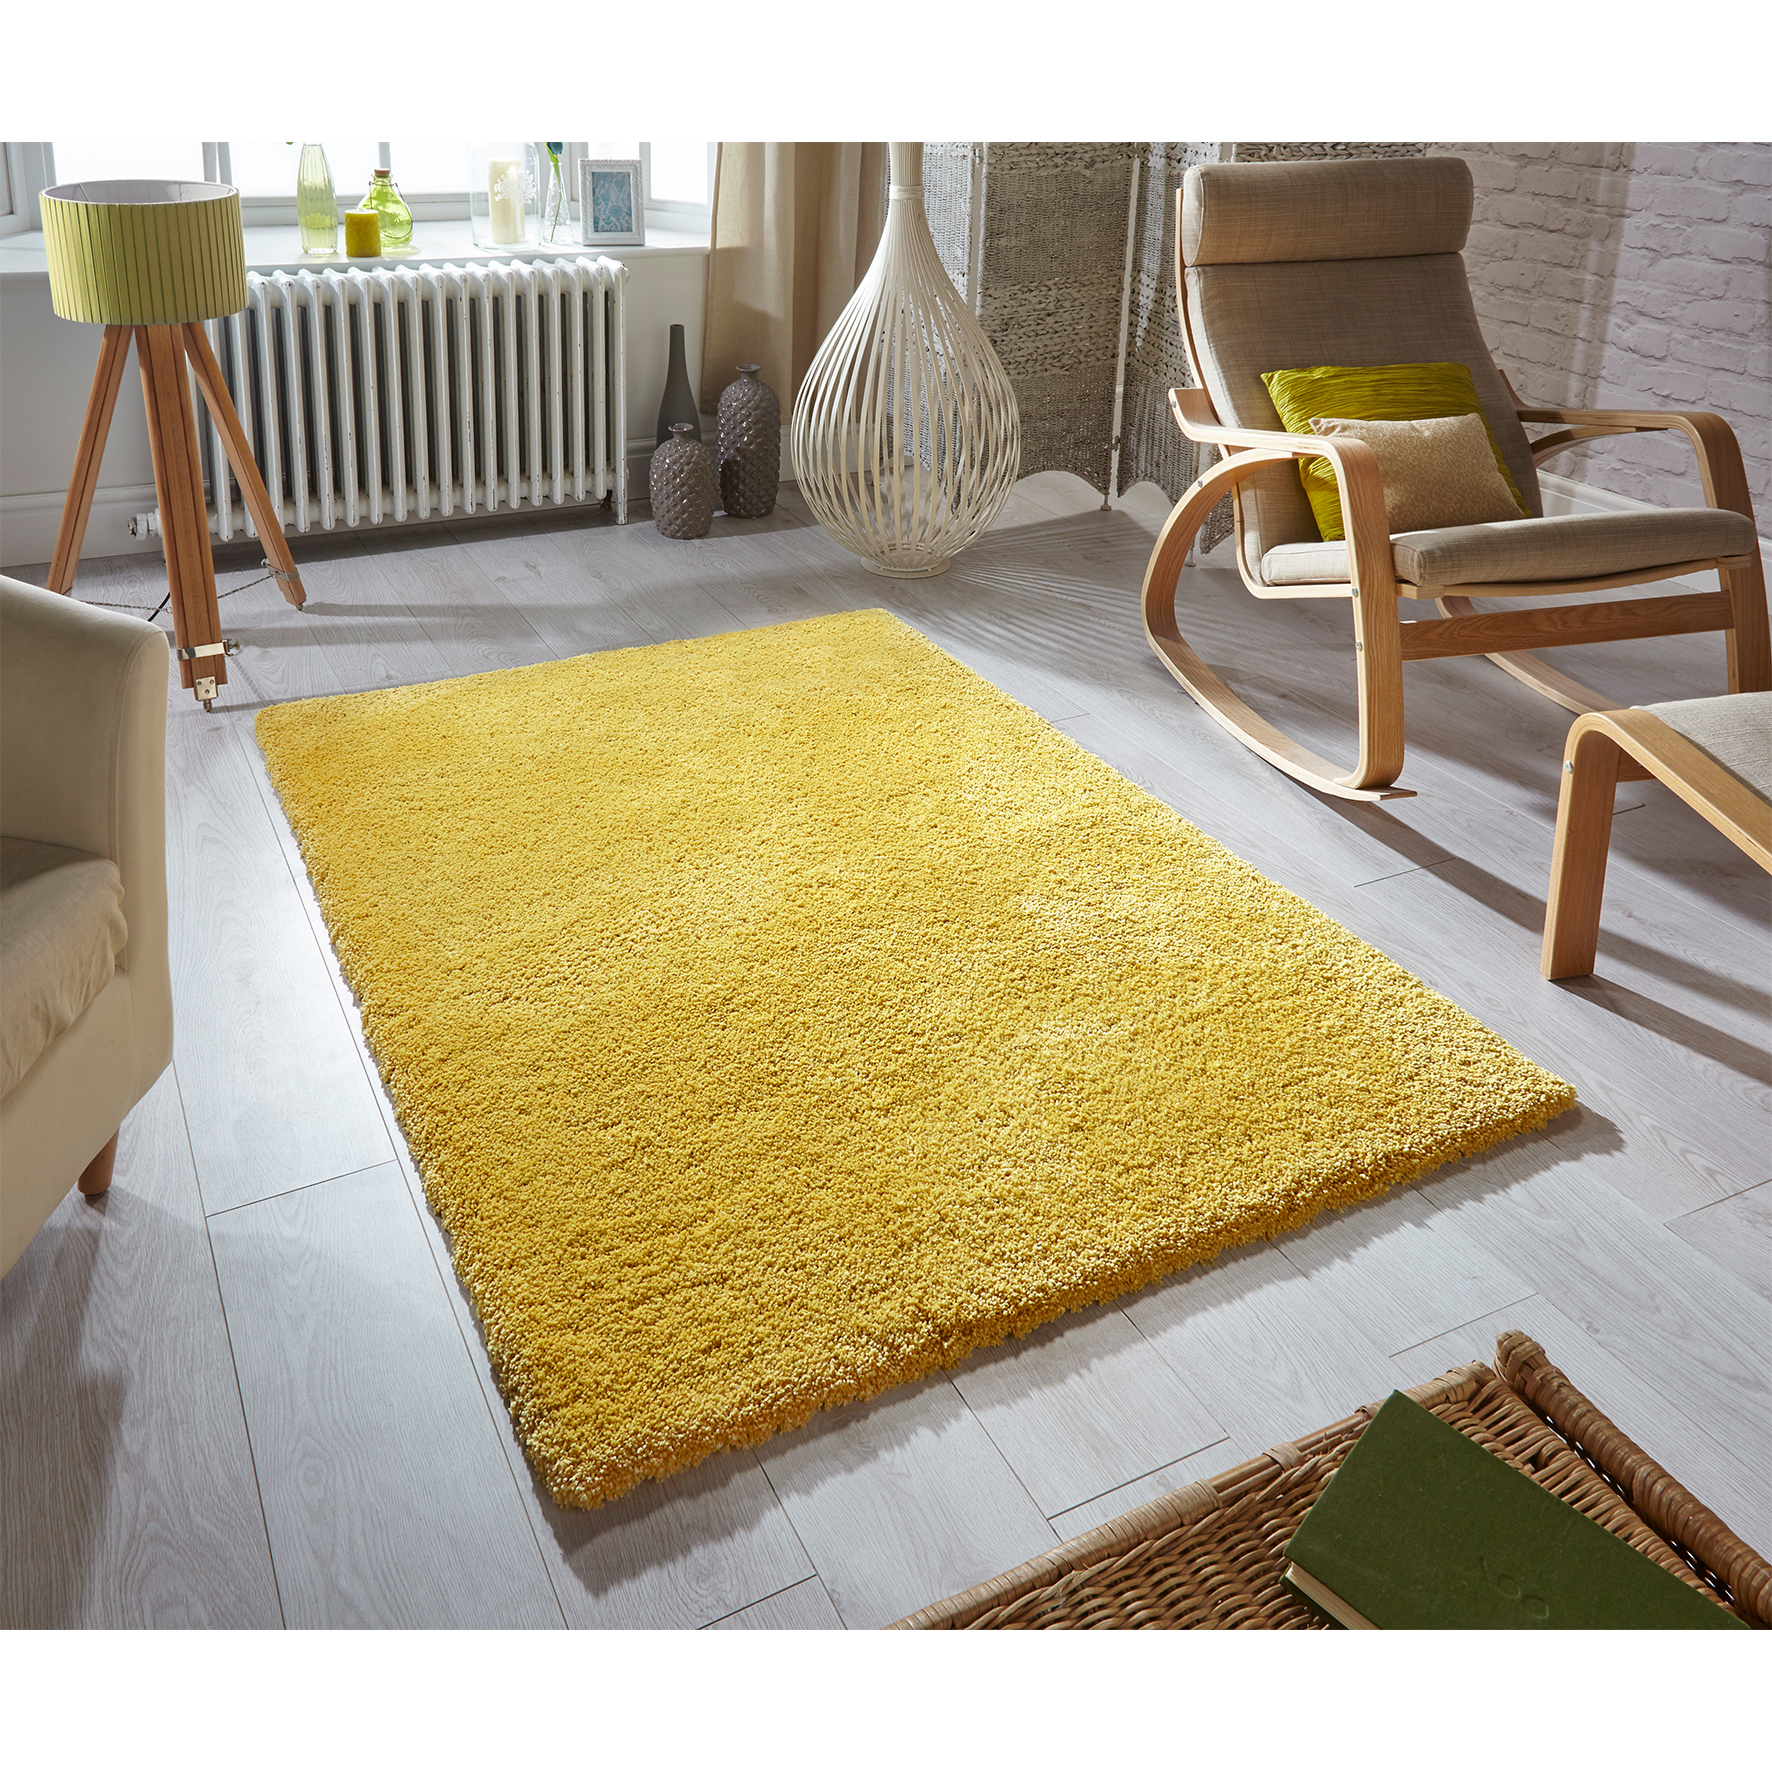 Comfy Mustard Supersoft Microfibre Rug available in two sizes 